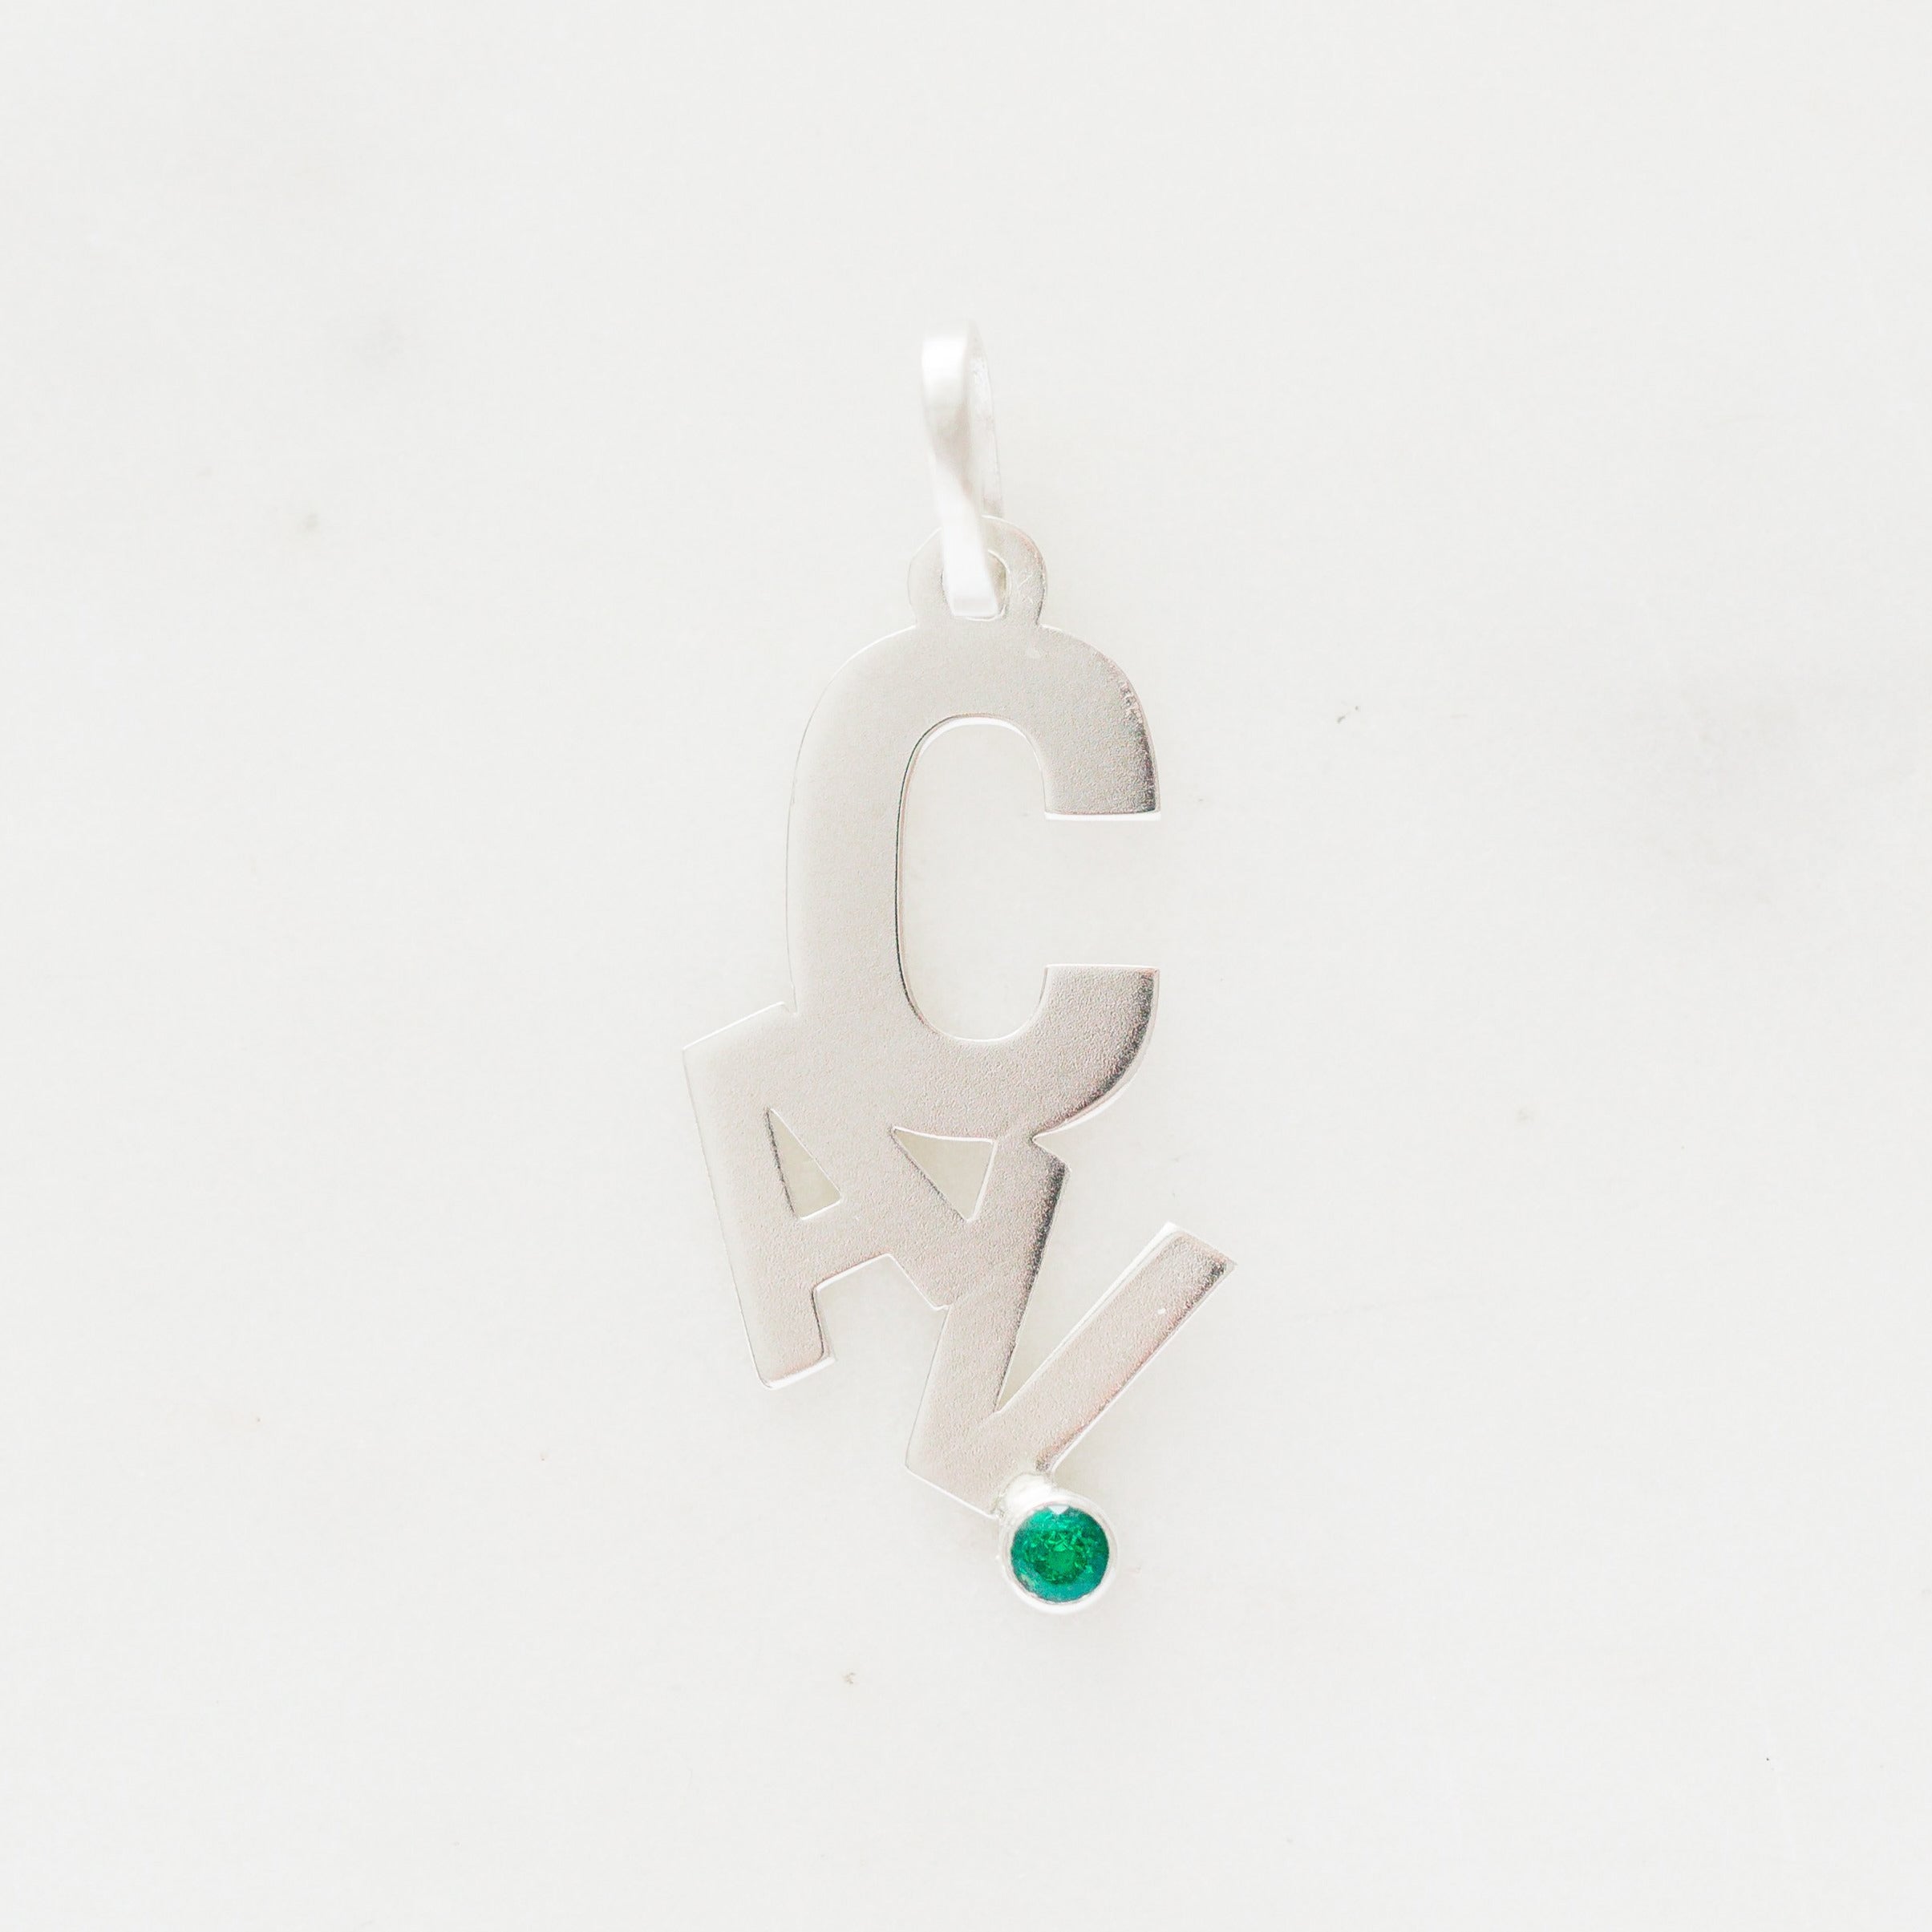 Sterling Silver Initial Necklace with 3 Letters